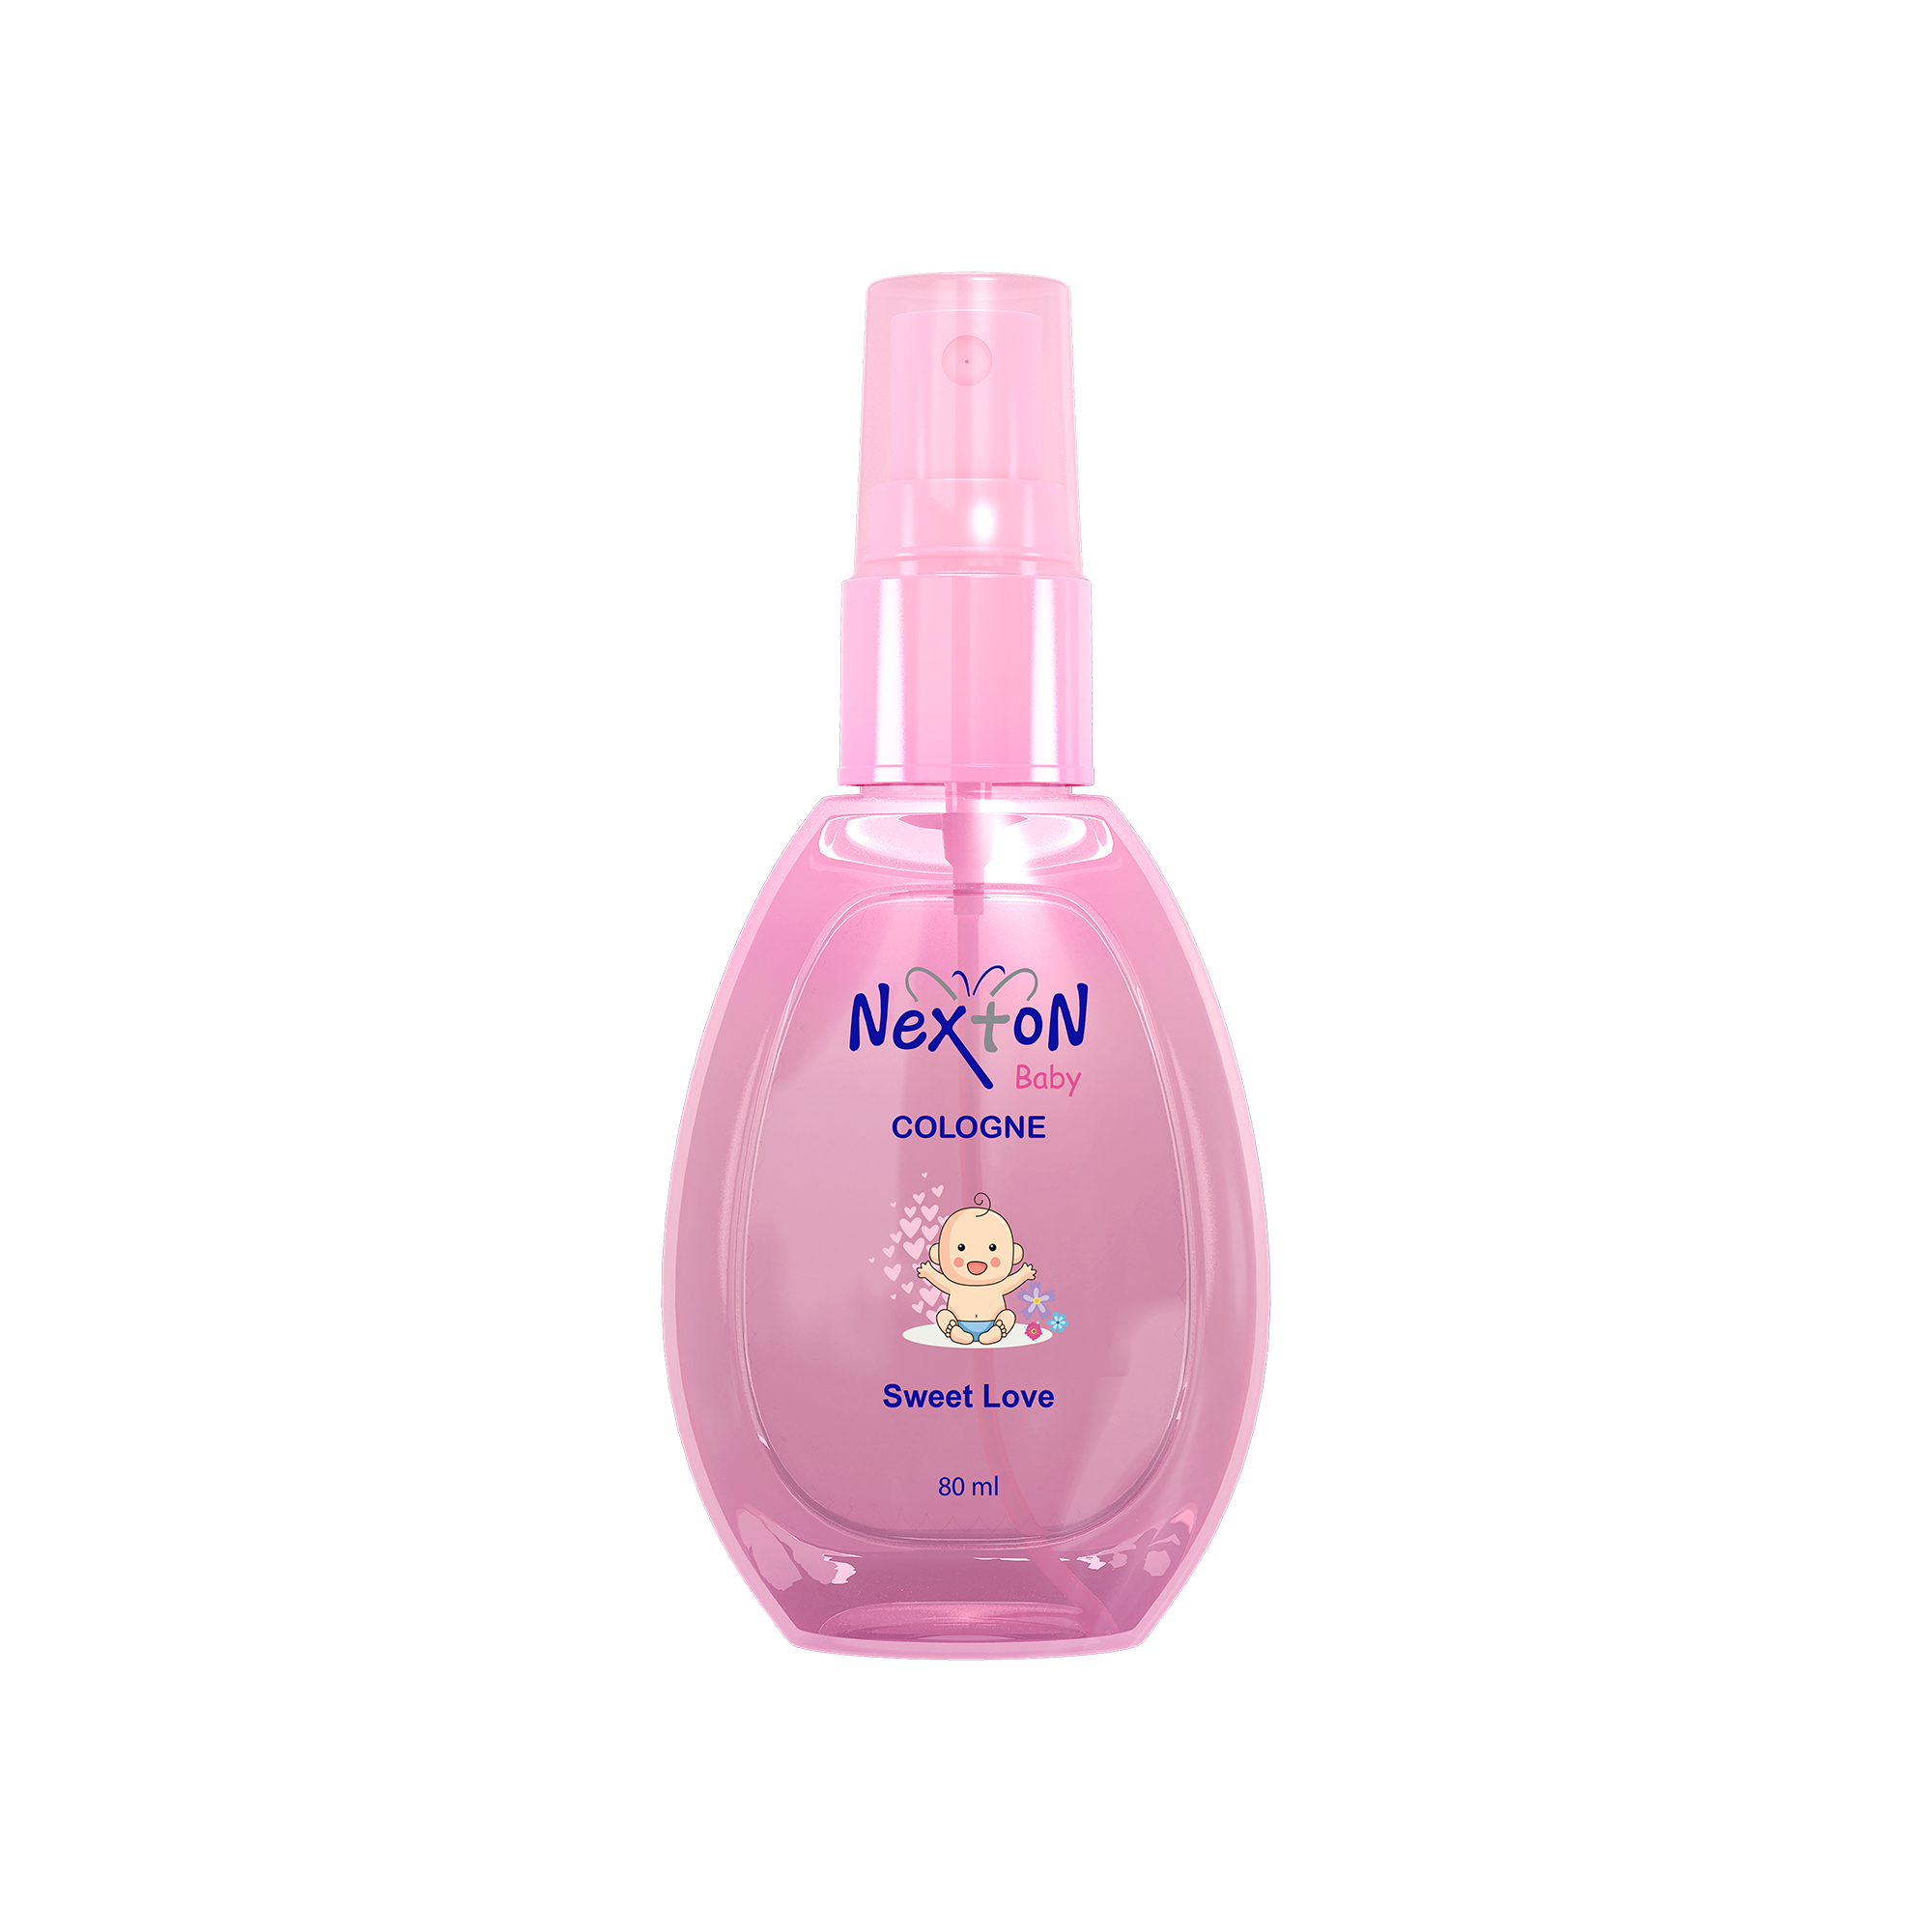 Nexton Sweet Love Baby Cologne